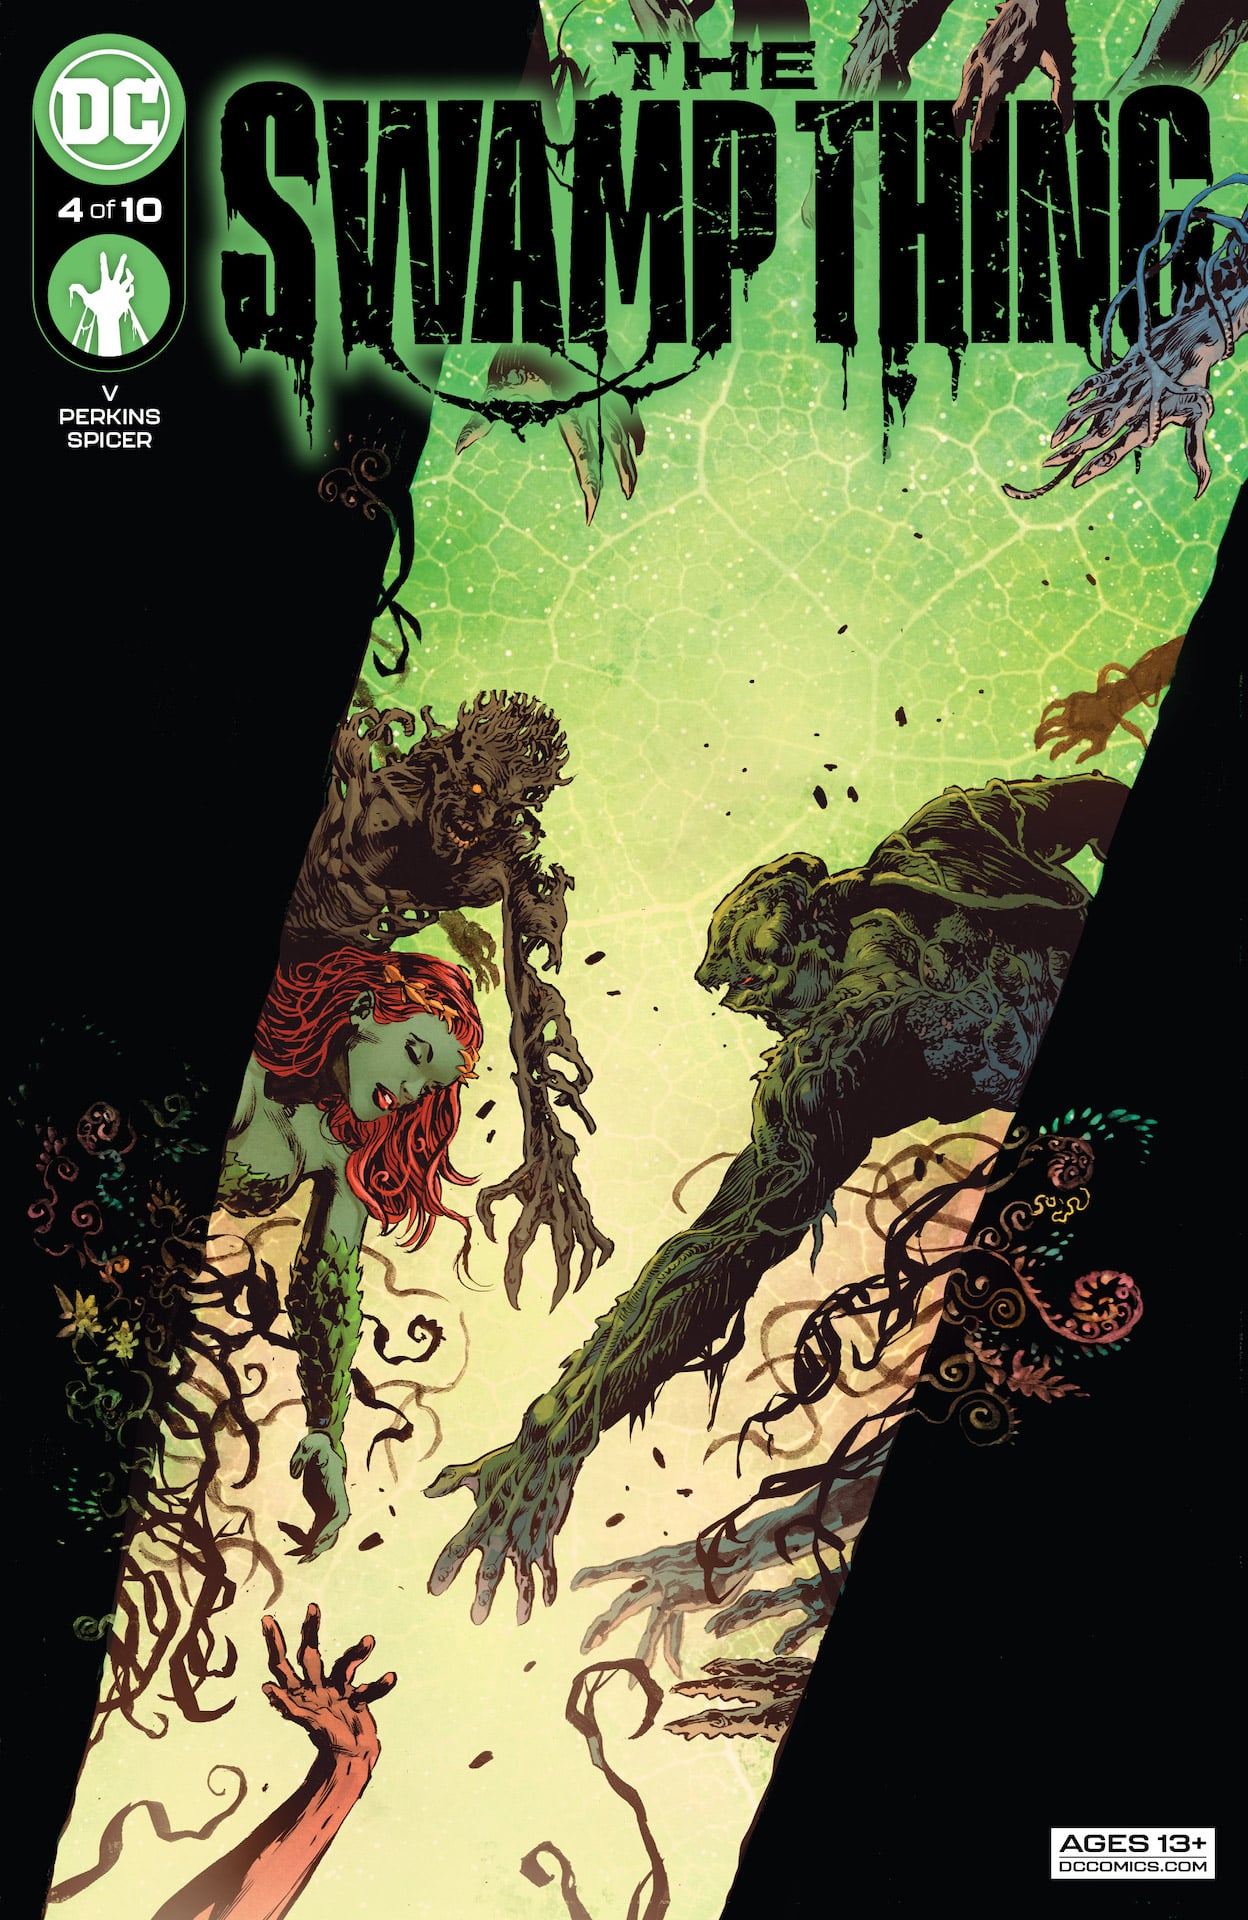 DC Preview: The Swamp Thing #4